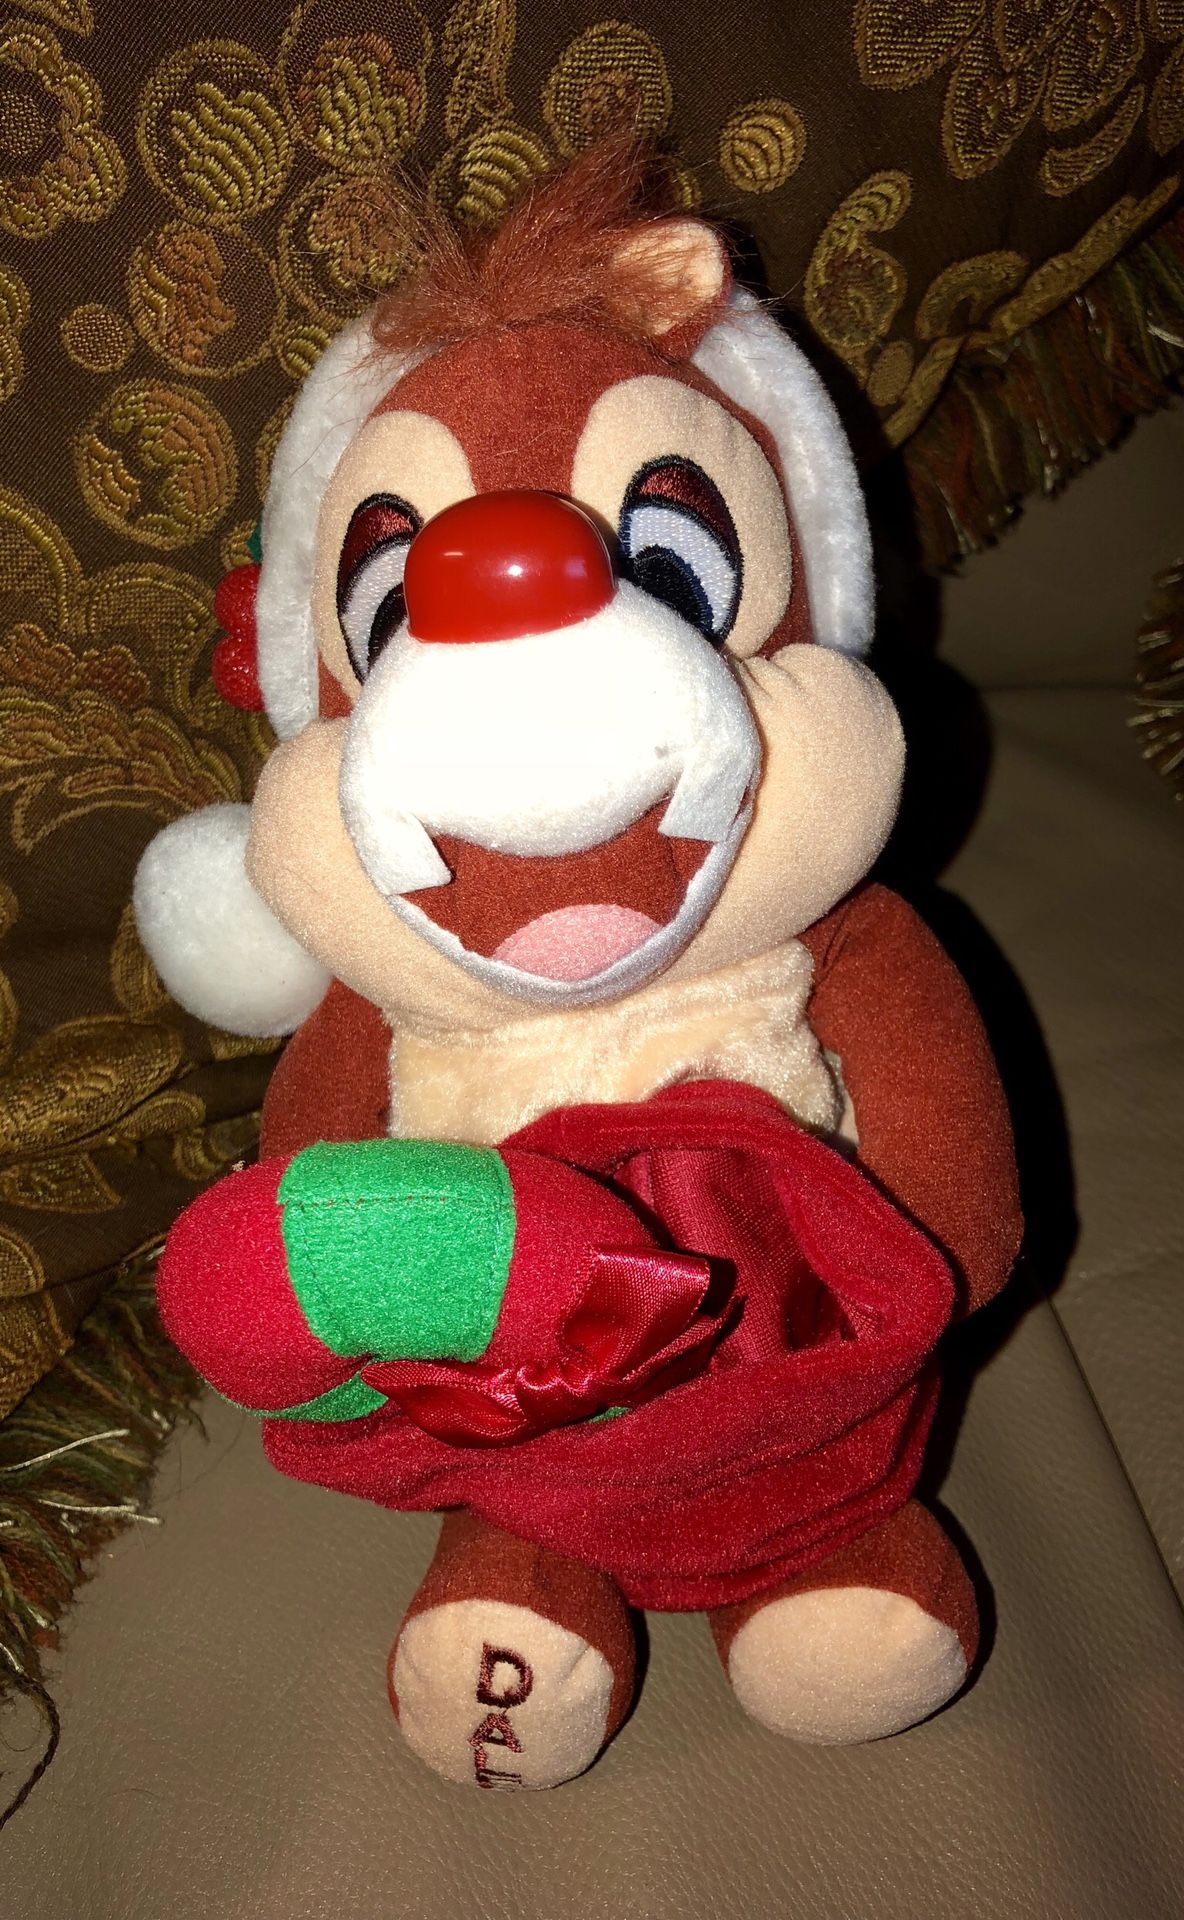 Dale - Walt Disney World- Wearing a Christmas hat. In good condition.